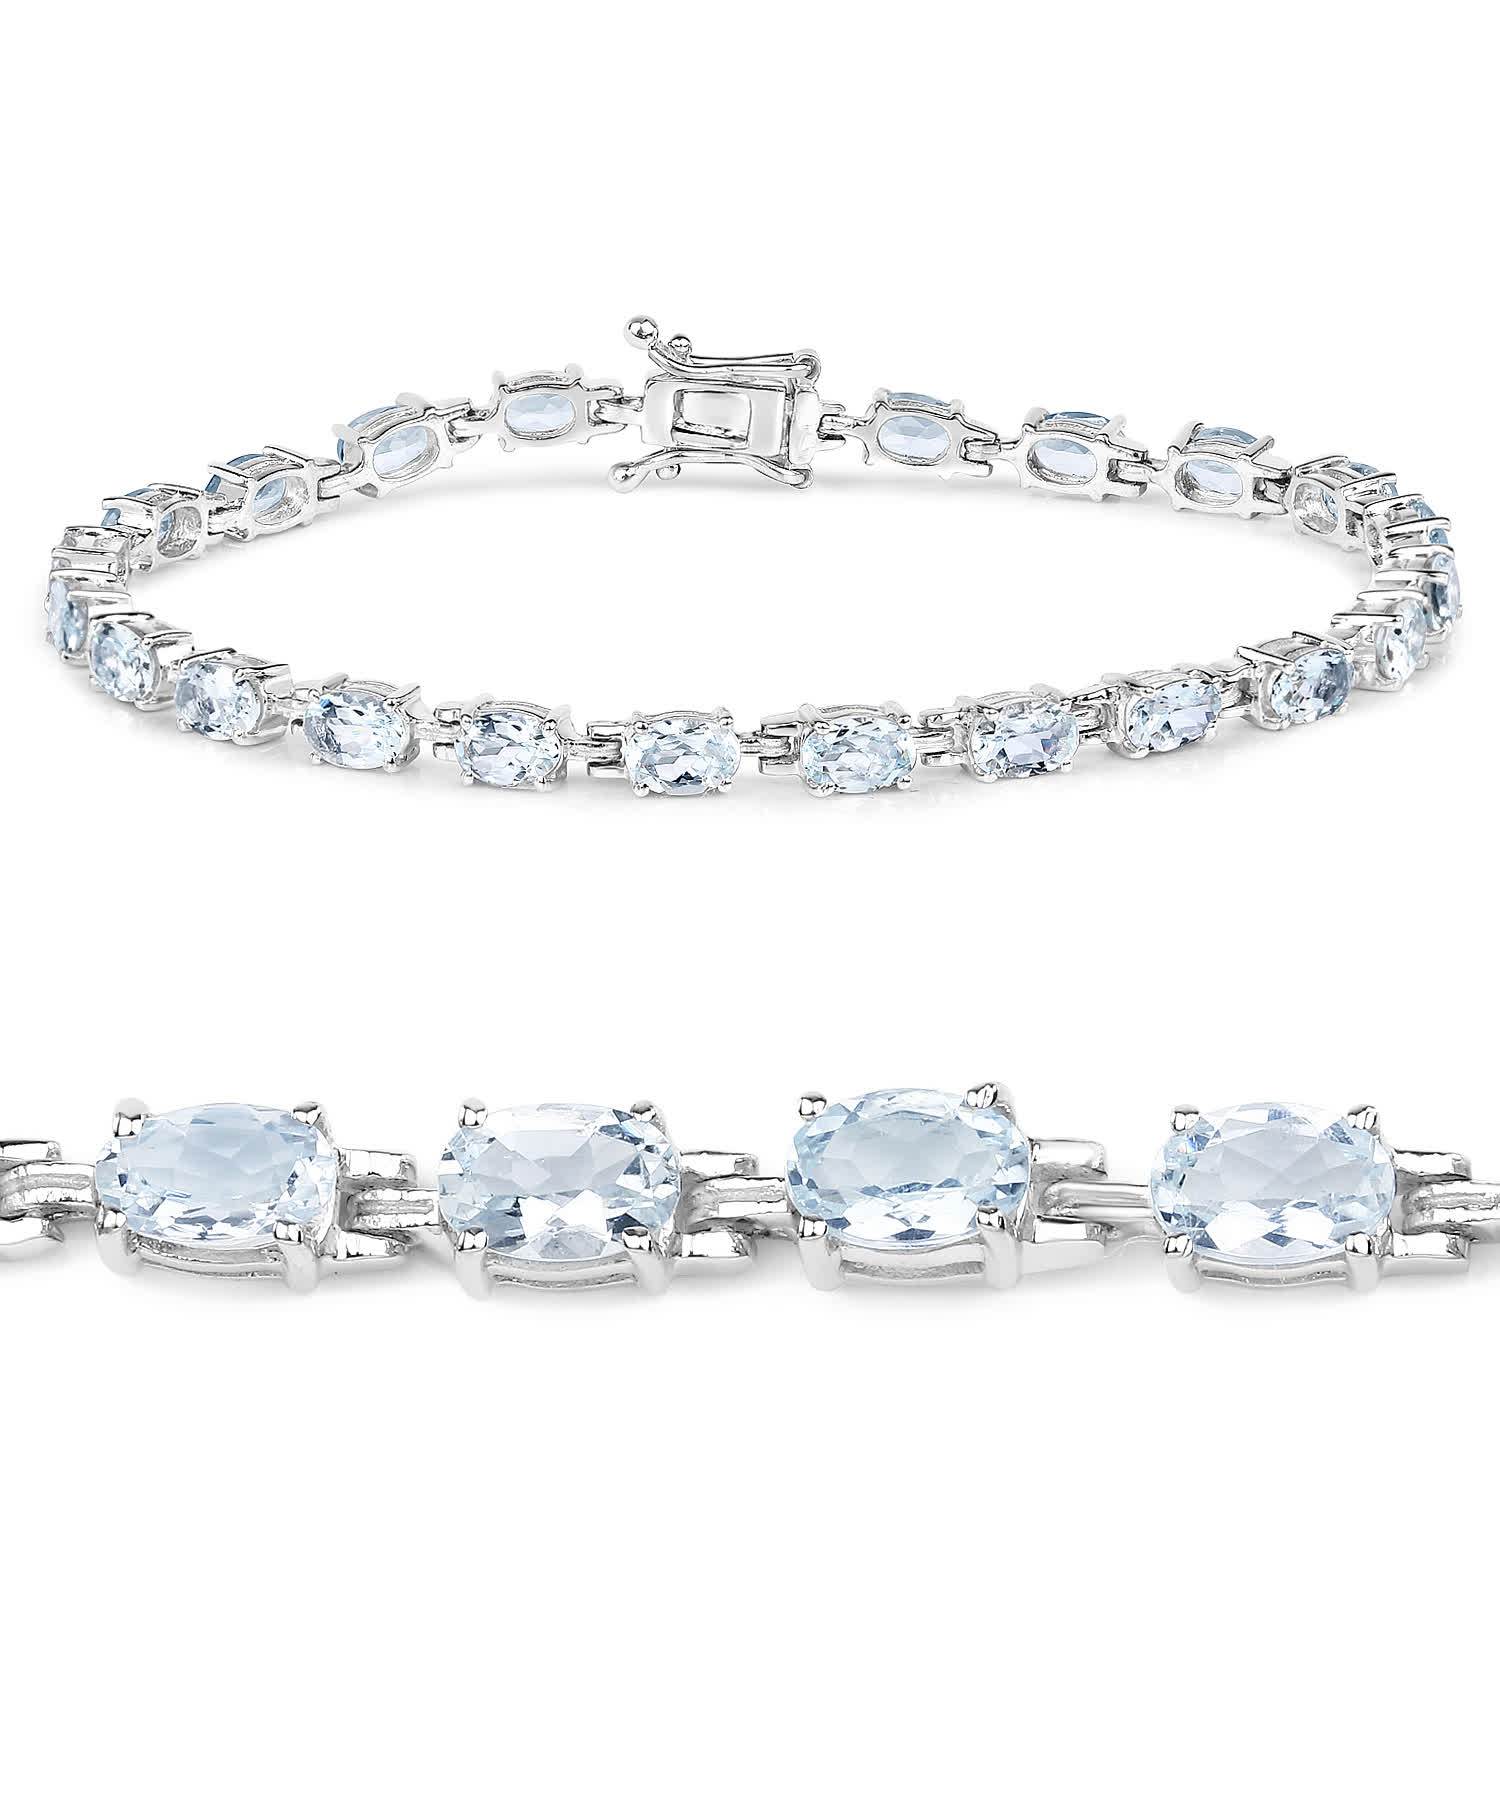 8.80ctw Natural Icy Sky Blue Aquamarine Rhodium Plated 925 Sterling Silver Tennis Bracelet View 2